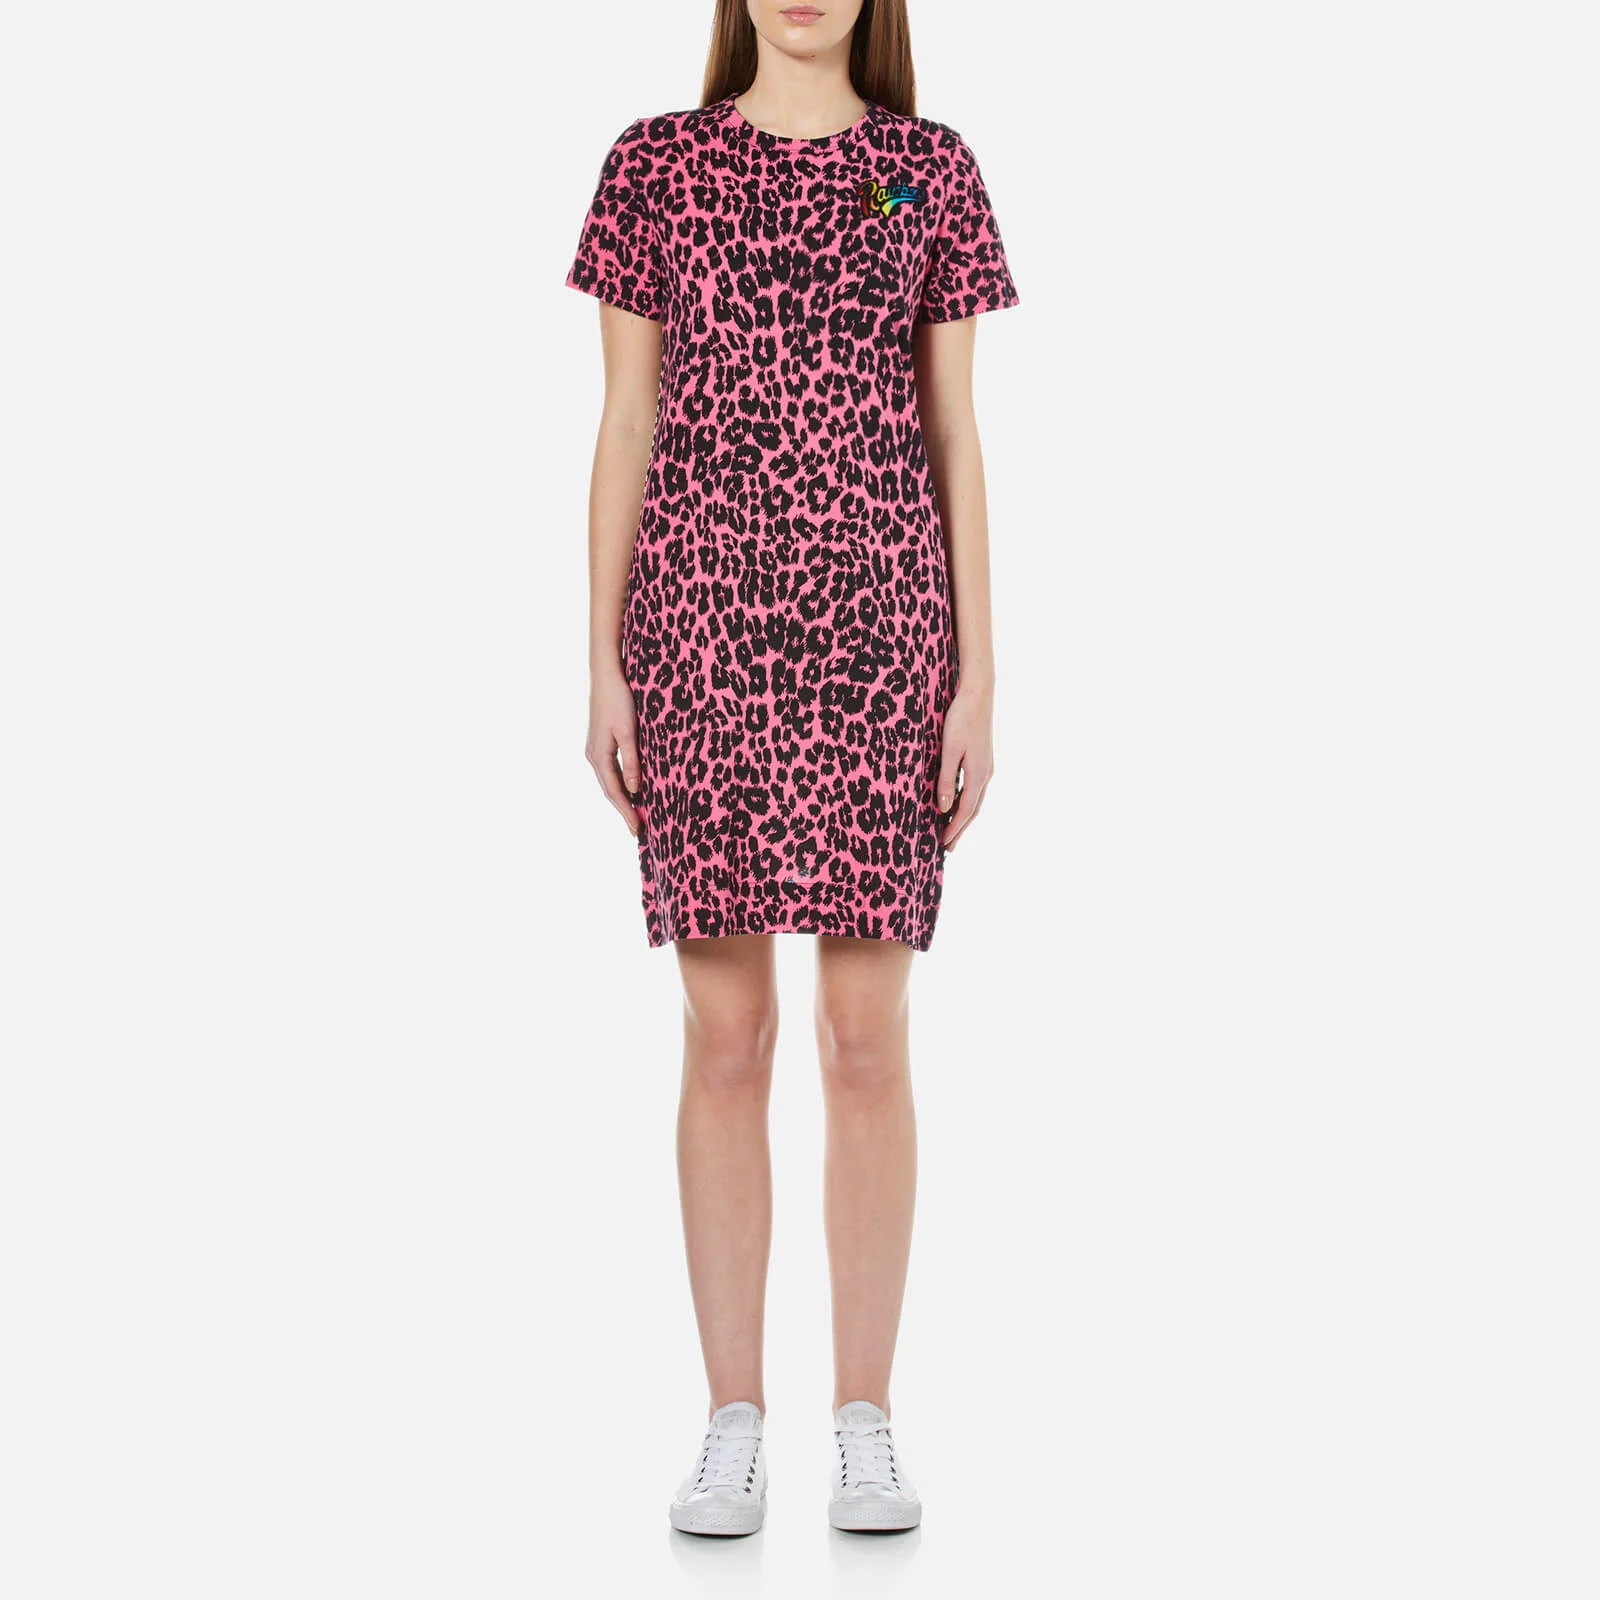 Marc Jacobs Women's Printed Patchwork Dress - Pink/Multi Image 1